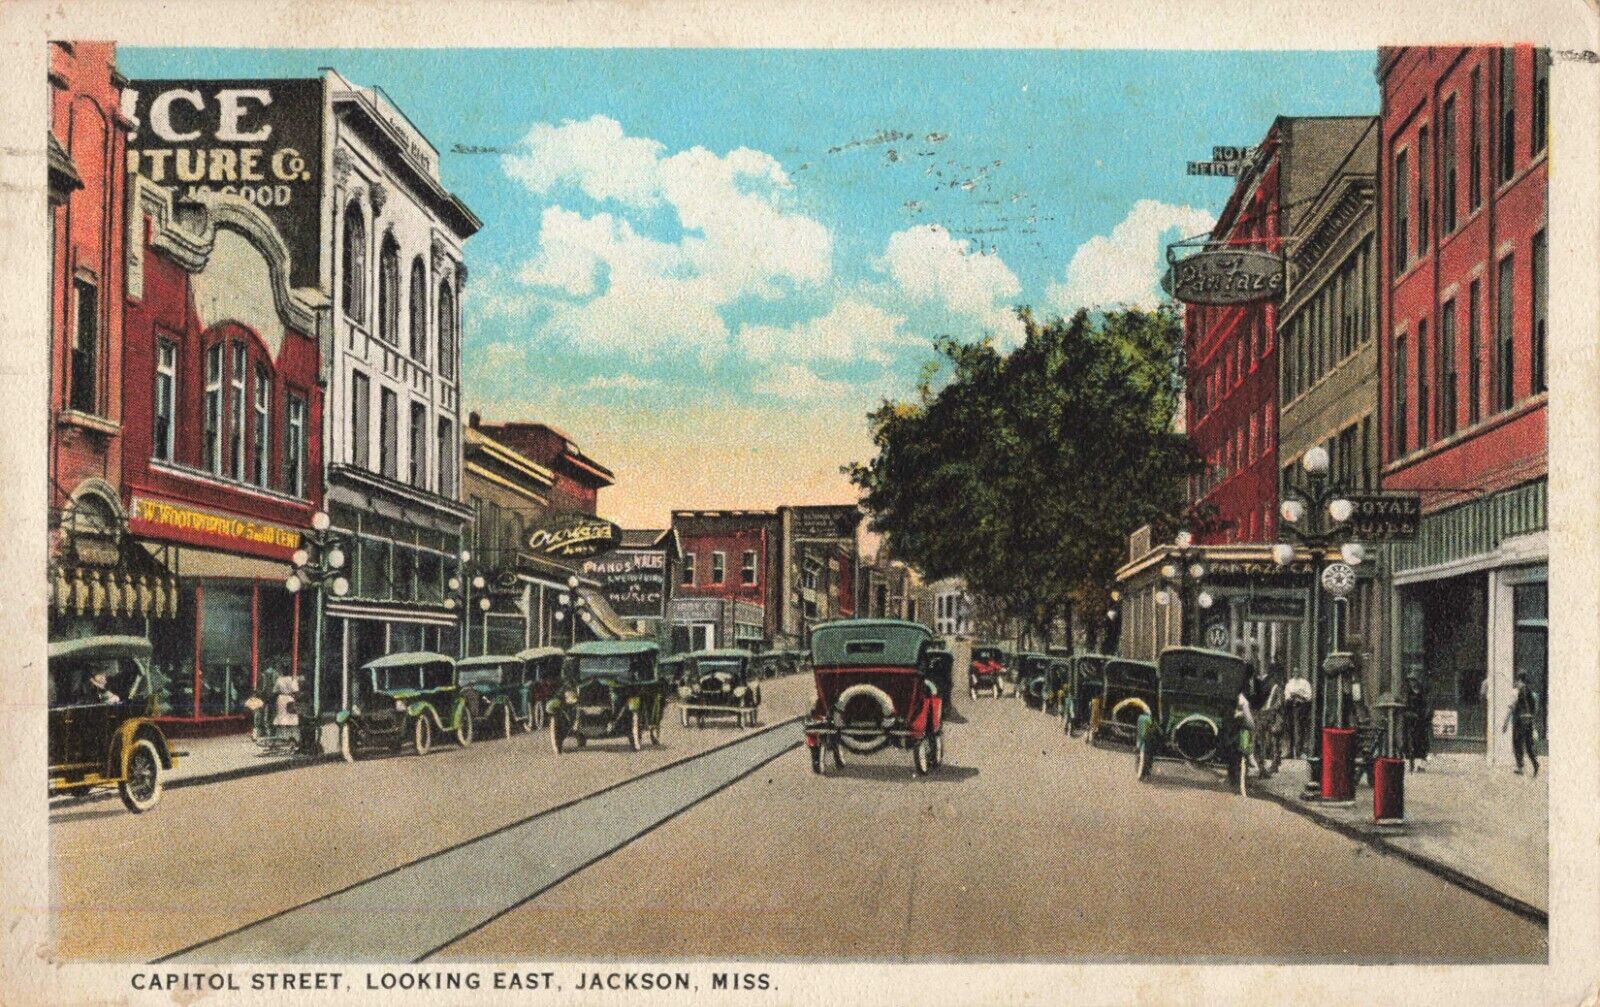 Capitol Street Looking East Jackson Mississippi MS Piano Store c1920 Postcard